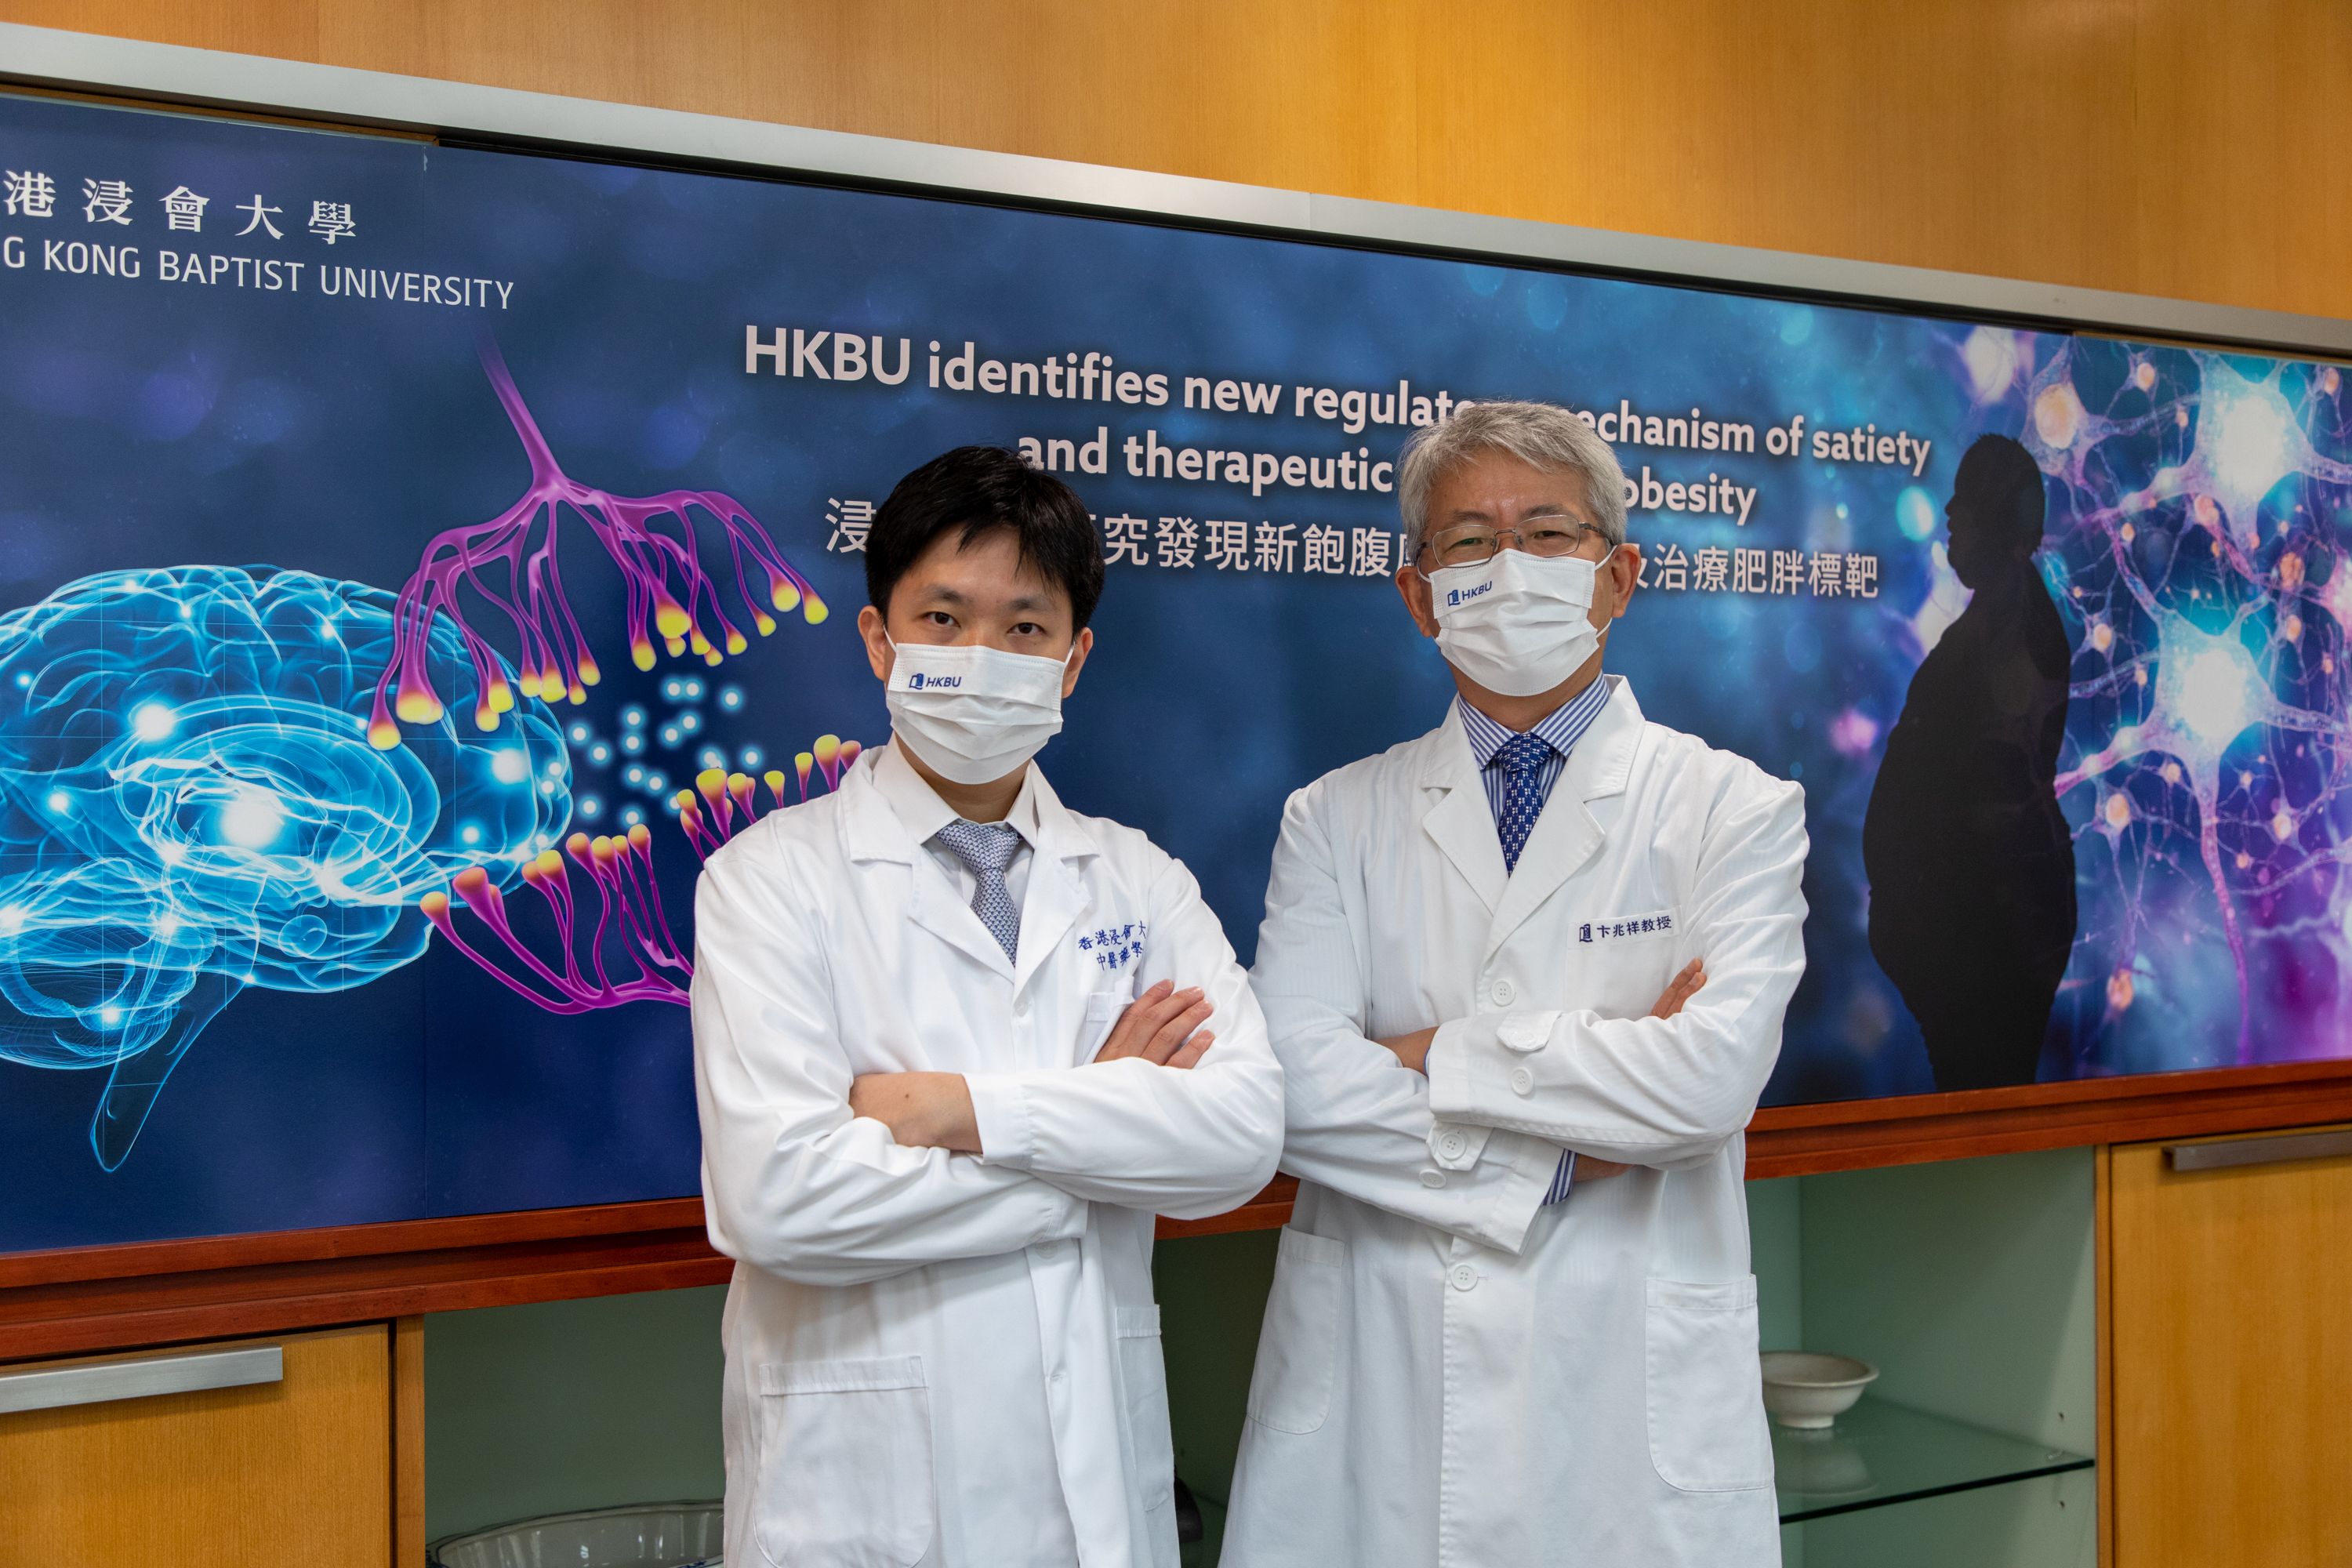 Dr Xavier Wong Hoi-leong, Assistant Professor of the Teaching and Research Division of the School of Chinese Medicine (left), and Professor Bian Zhaoxiang, Director of the Clinical Division of the School of Chinese Medicine and Tsang Shiu Tim Endowed Chair of Chinese Medicine Clinical Studies at HKBU (right), identified a proteolytic enzyme called MT1-MMP which could serve as a promising potential drug target for the management of obesity.